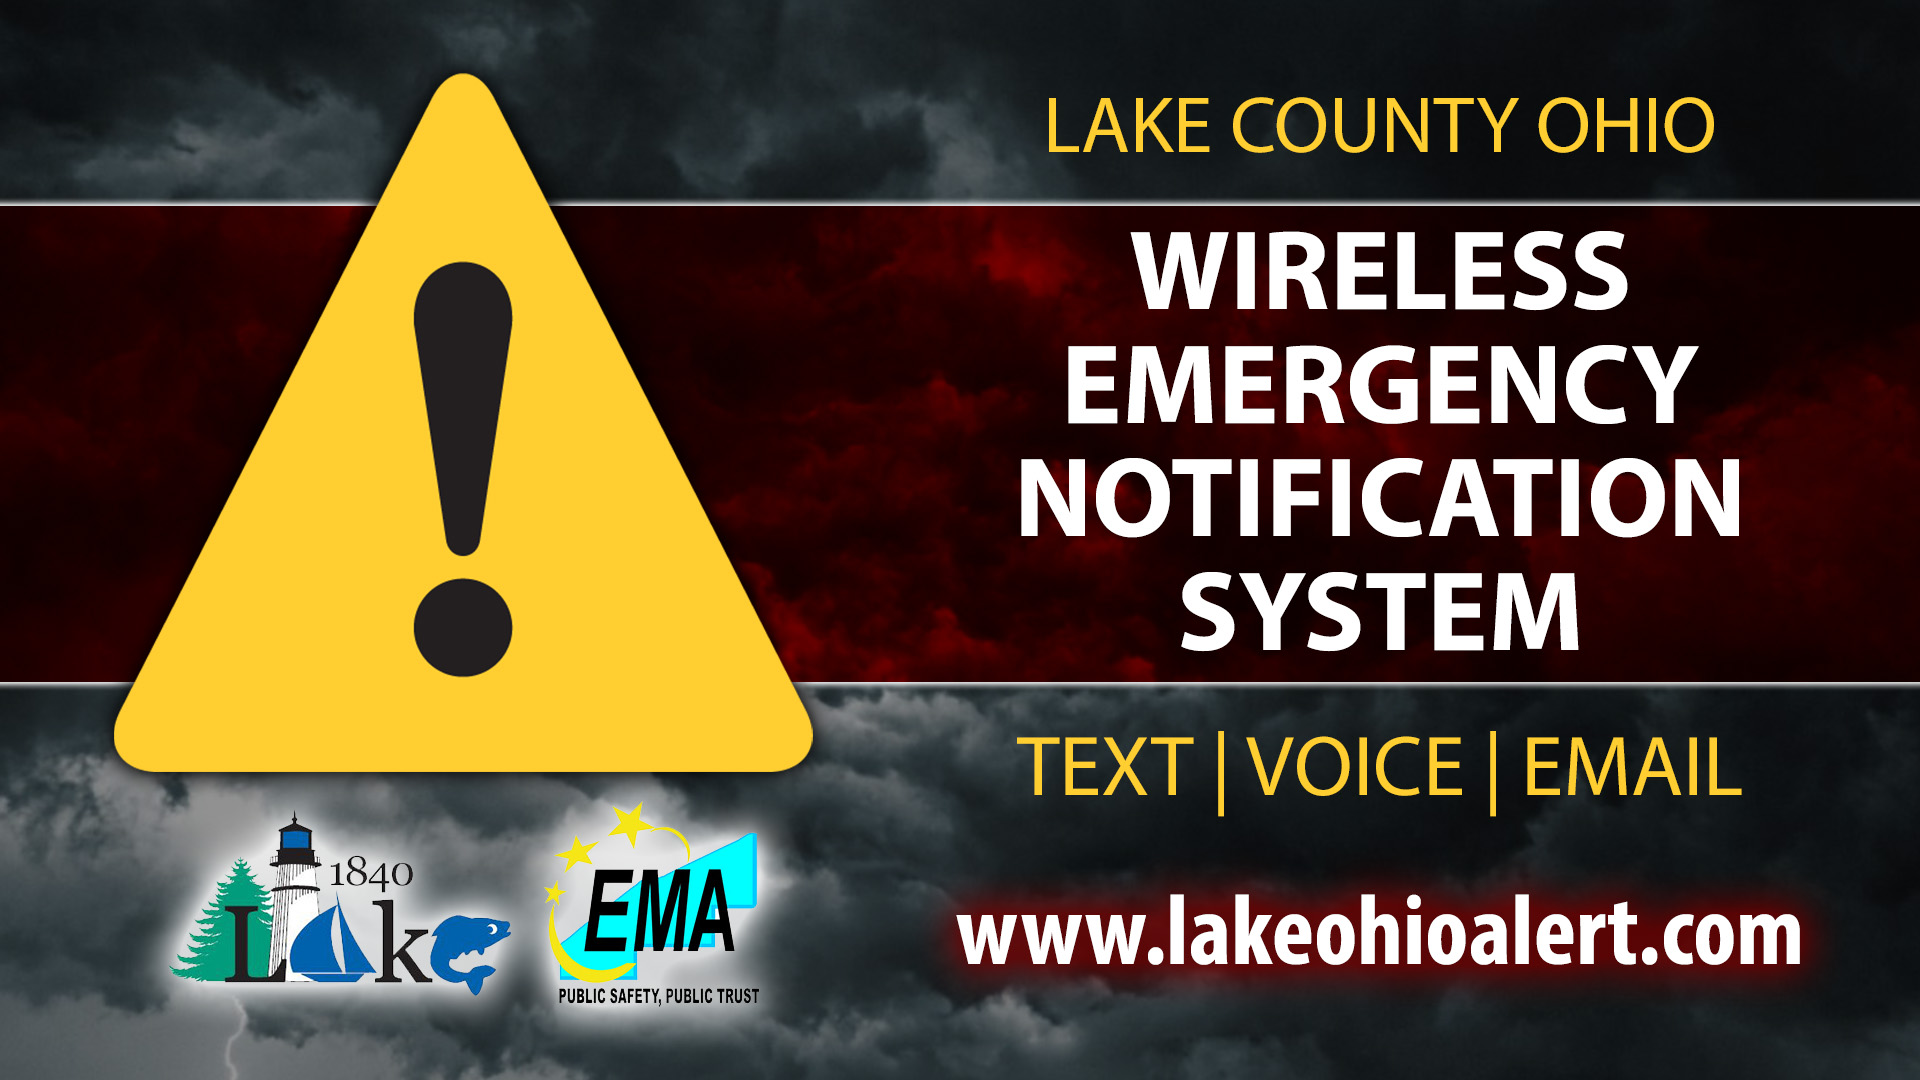 Sign Up for the Lake County Ohio Wireless Emergency Notification System